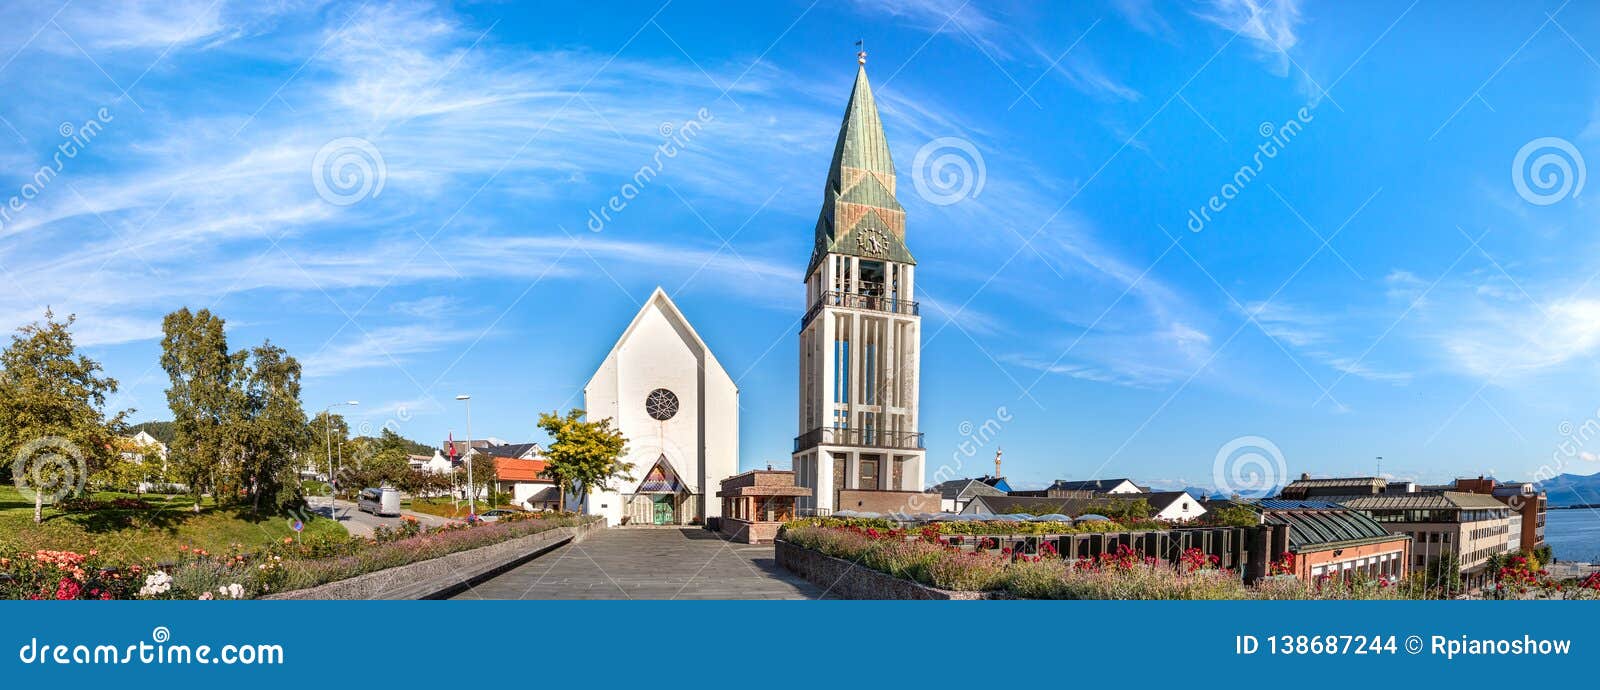 panoramic view the molde domkirke, the cathedral of molde, norway